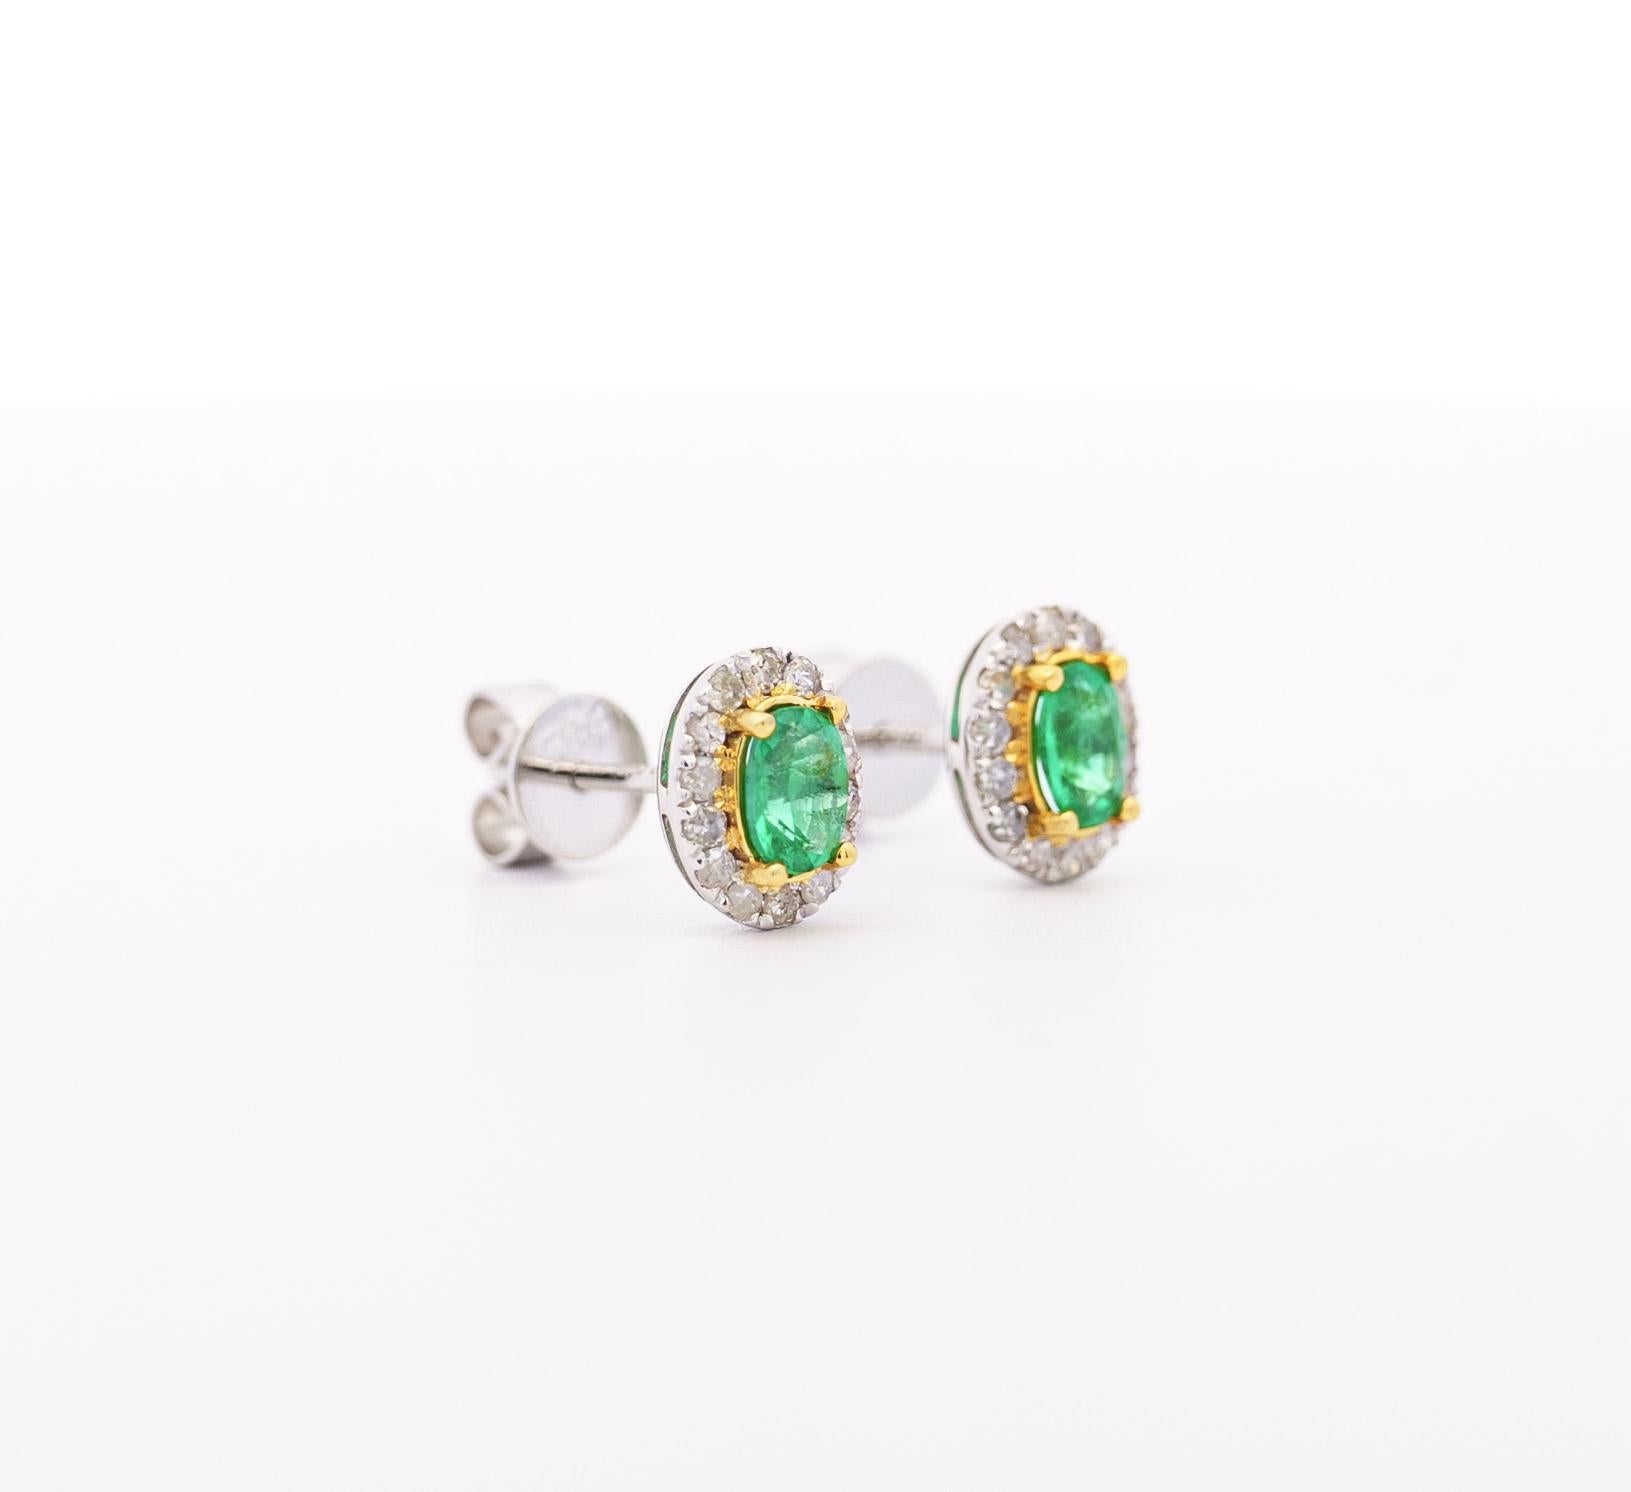 18k solid white and yellow gold oval shape and cut natural emerald and diamond halo stud earrings. Featuring natural oval cut emeralds with a strong green saturation and excellent transparency. The round diamond halo shimmers with brilliance as they